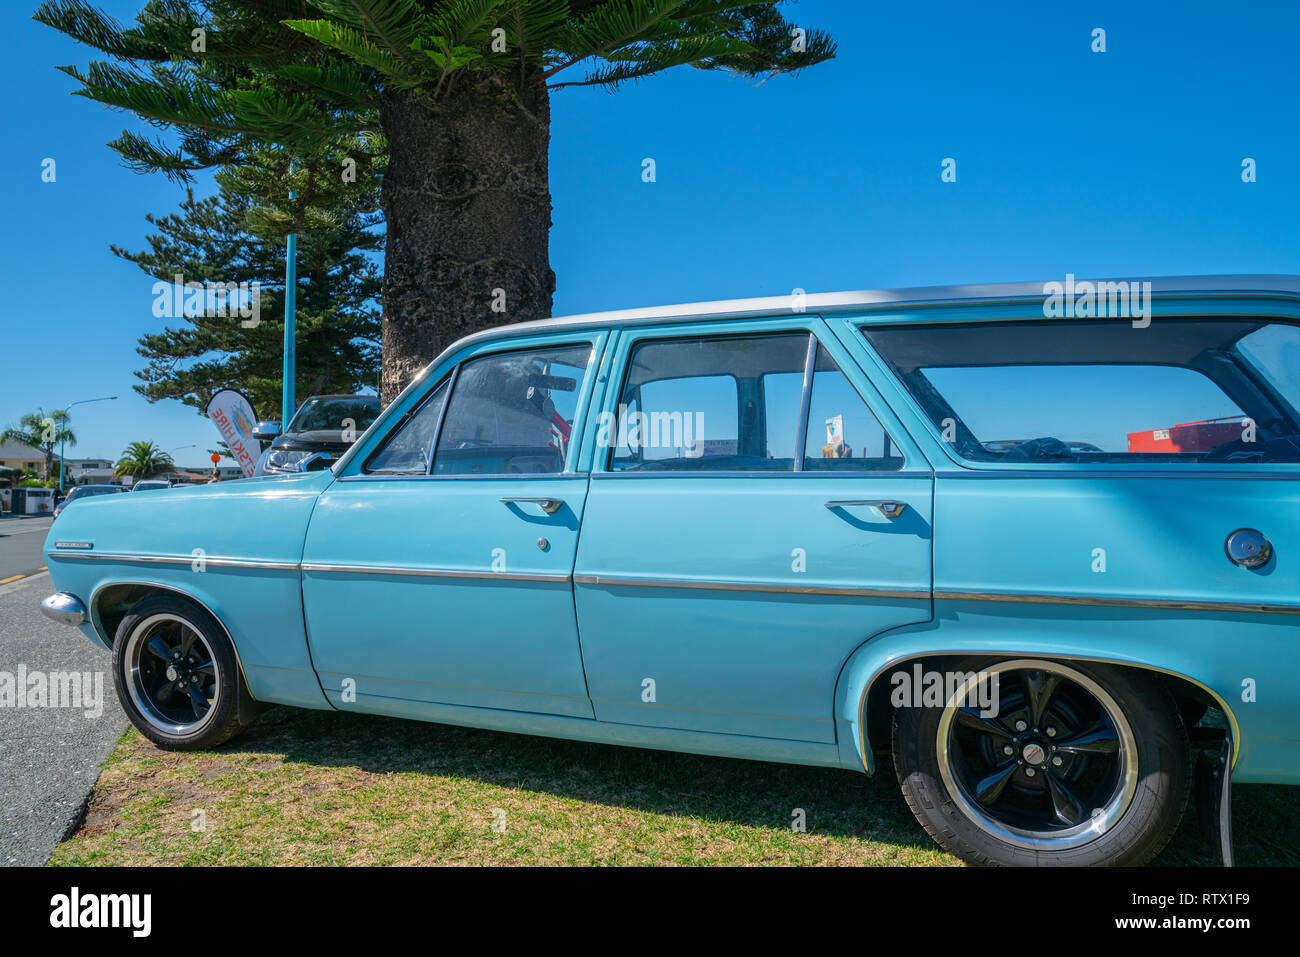 TAURANGA NEW ZEALAND - MARCH 3 2019; Vintage blue Holden Special station-wagon parked under Norflok pine on Pilot Bay Mount Maunganui. Stock Photo